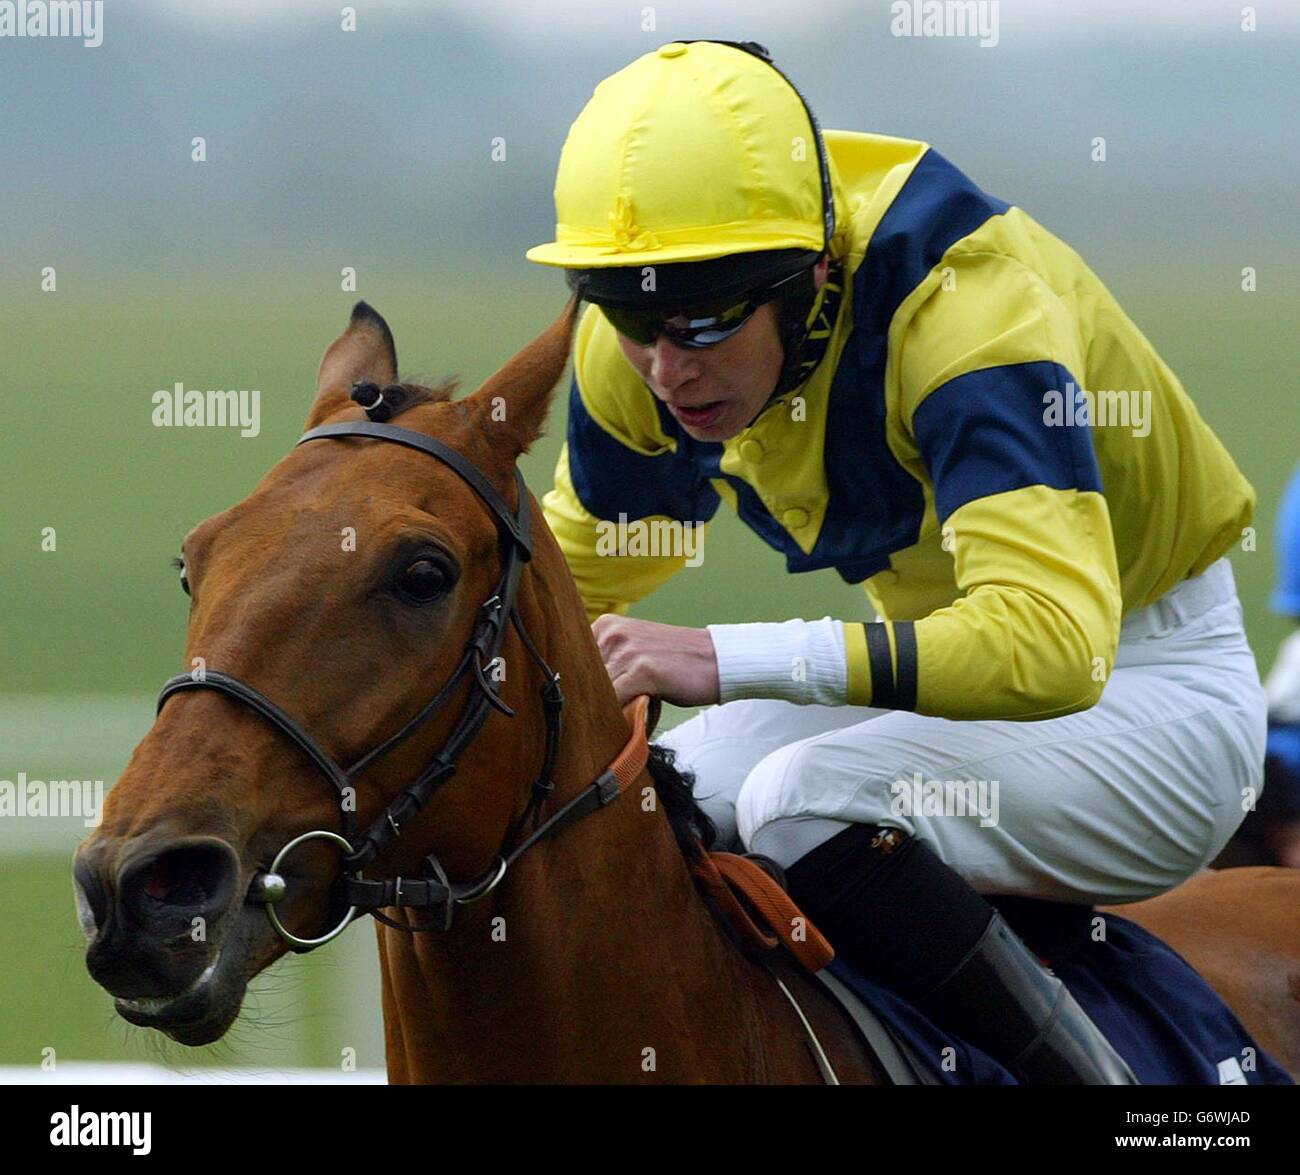 RACING Newmarket. Gateman ridden by Keith Dalgleish goes on to win the Weatherbys Earl of Sefton Stakes over the Rowley Mile Racecourse at Newmarket. Stock Photo